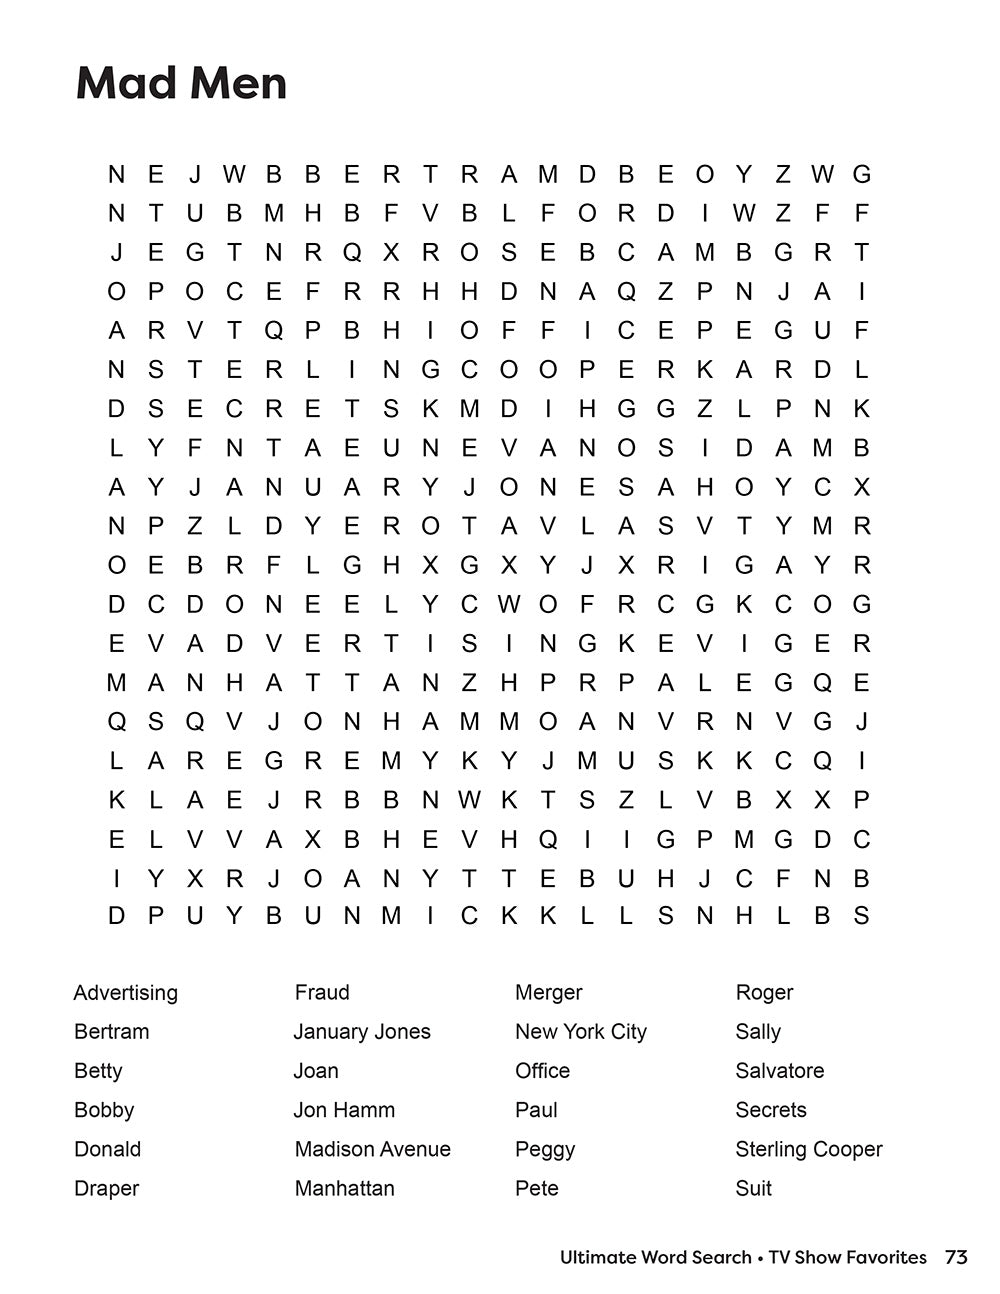 Ultimate Word Search TV Show Favorites